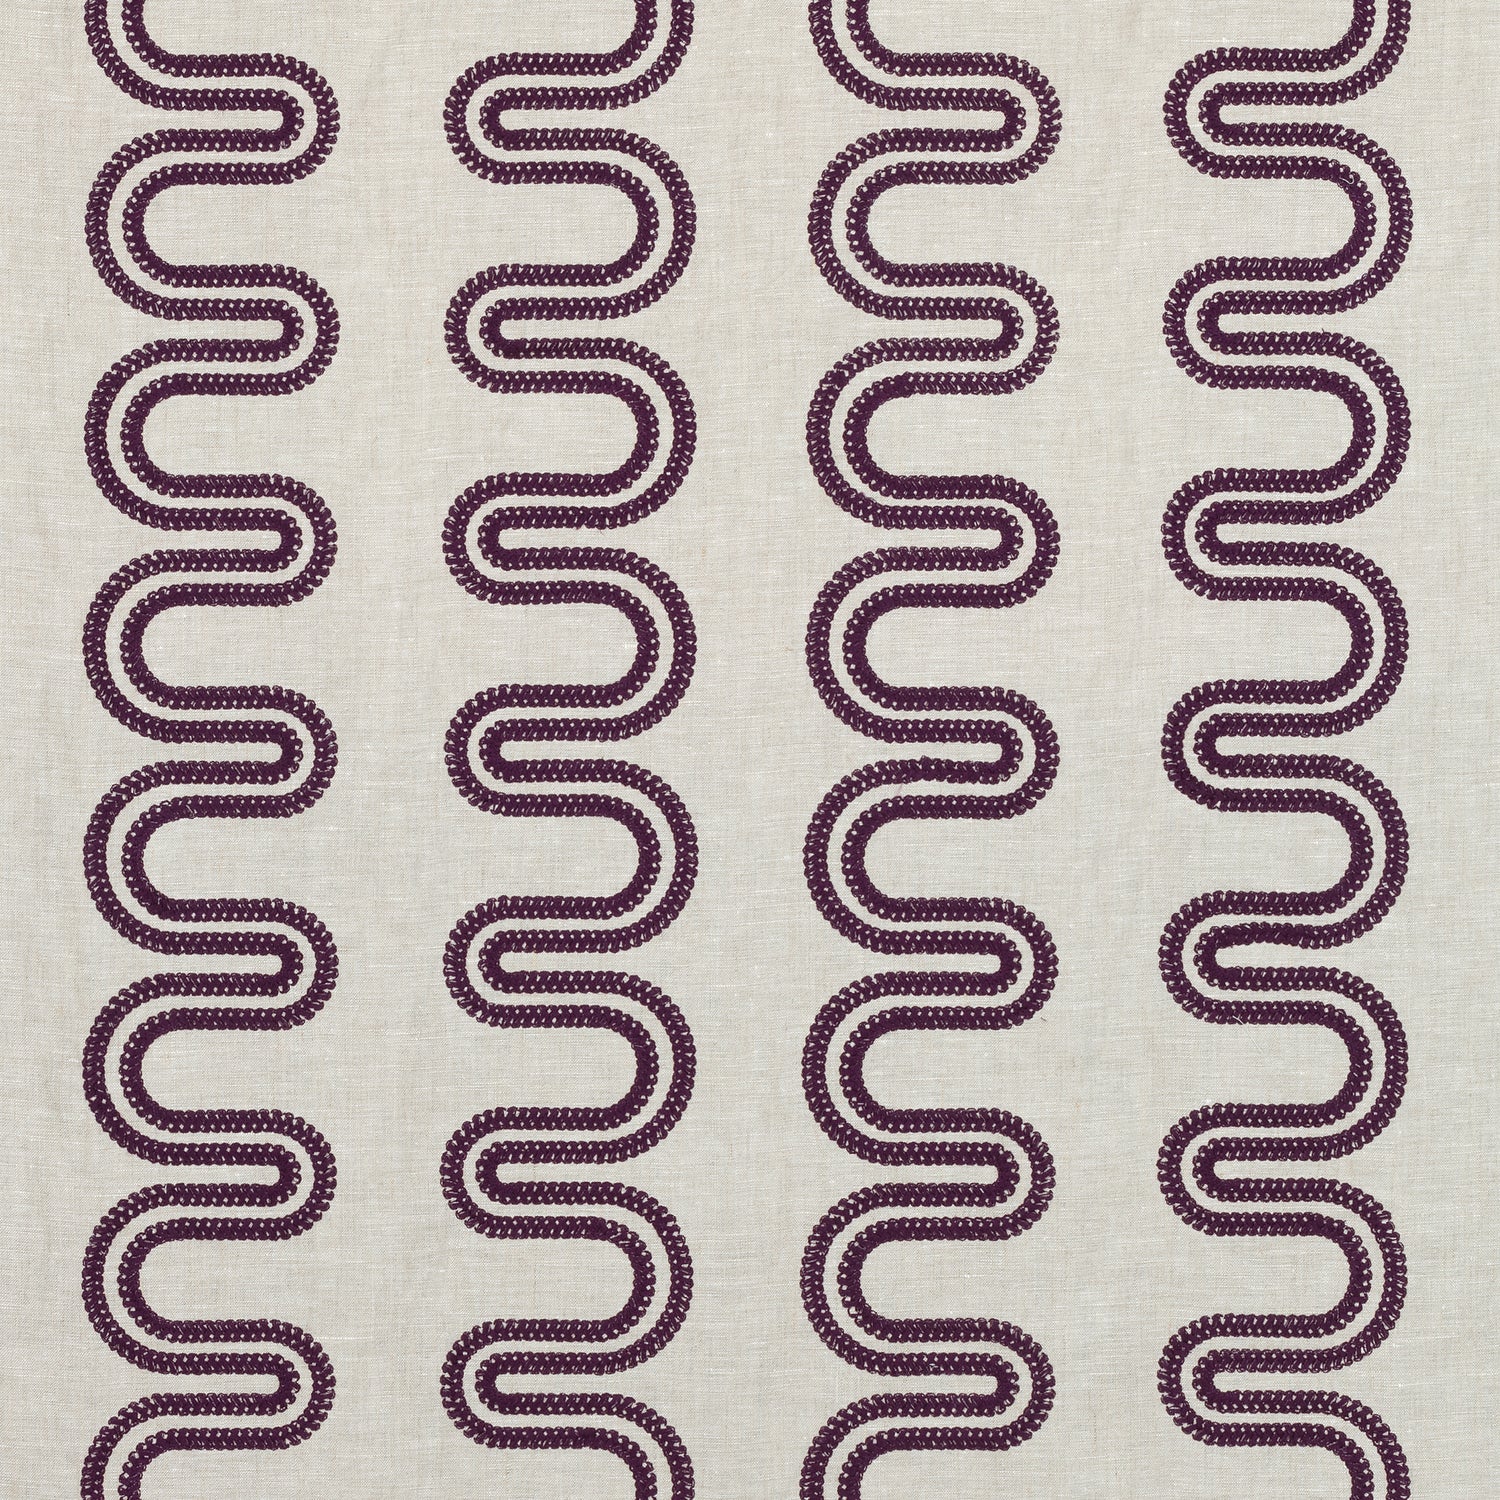 Herriot Way Embroidery fabric in plum on flax  color - pattern number AF9638 - by Anna French in the Savoy collection